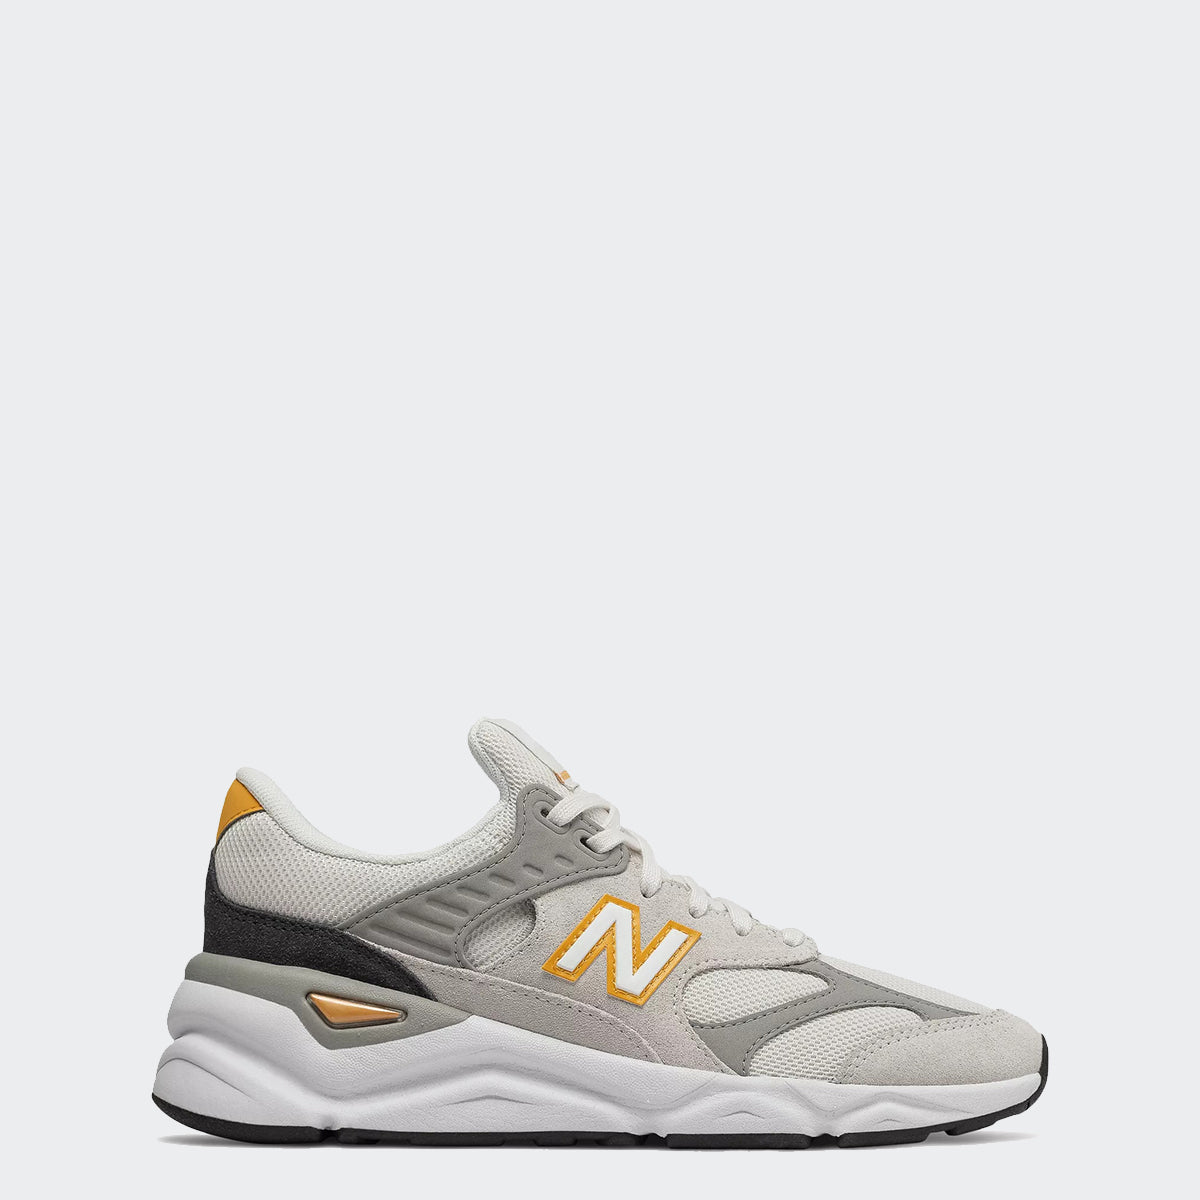 x9 reconstructed sneaker new balance